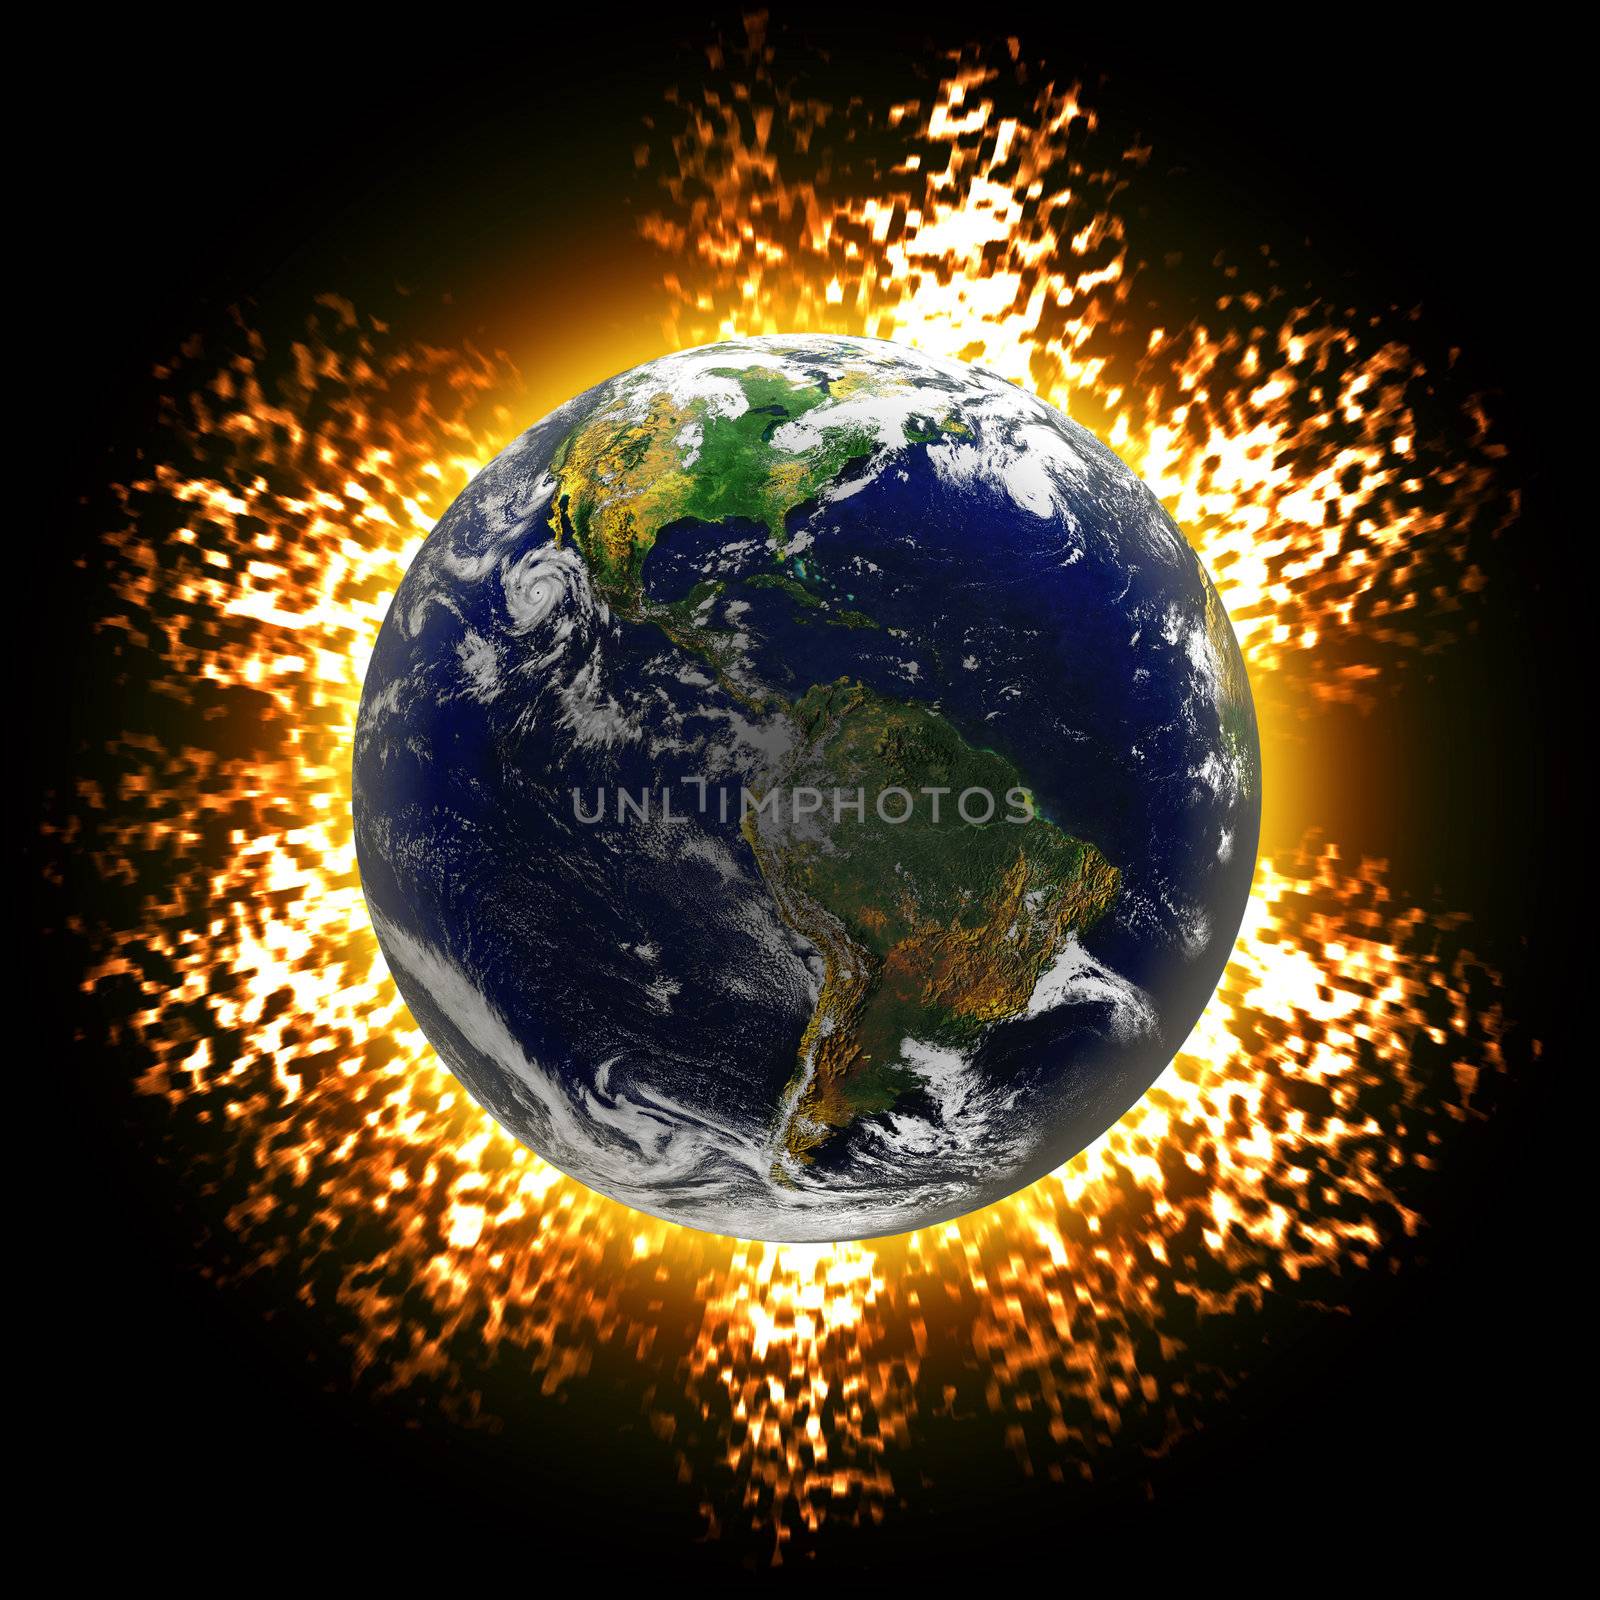 Illustration of an exploding planet earth or asteroid collision against the globe.  Earth image courtesy of NASA.